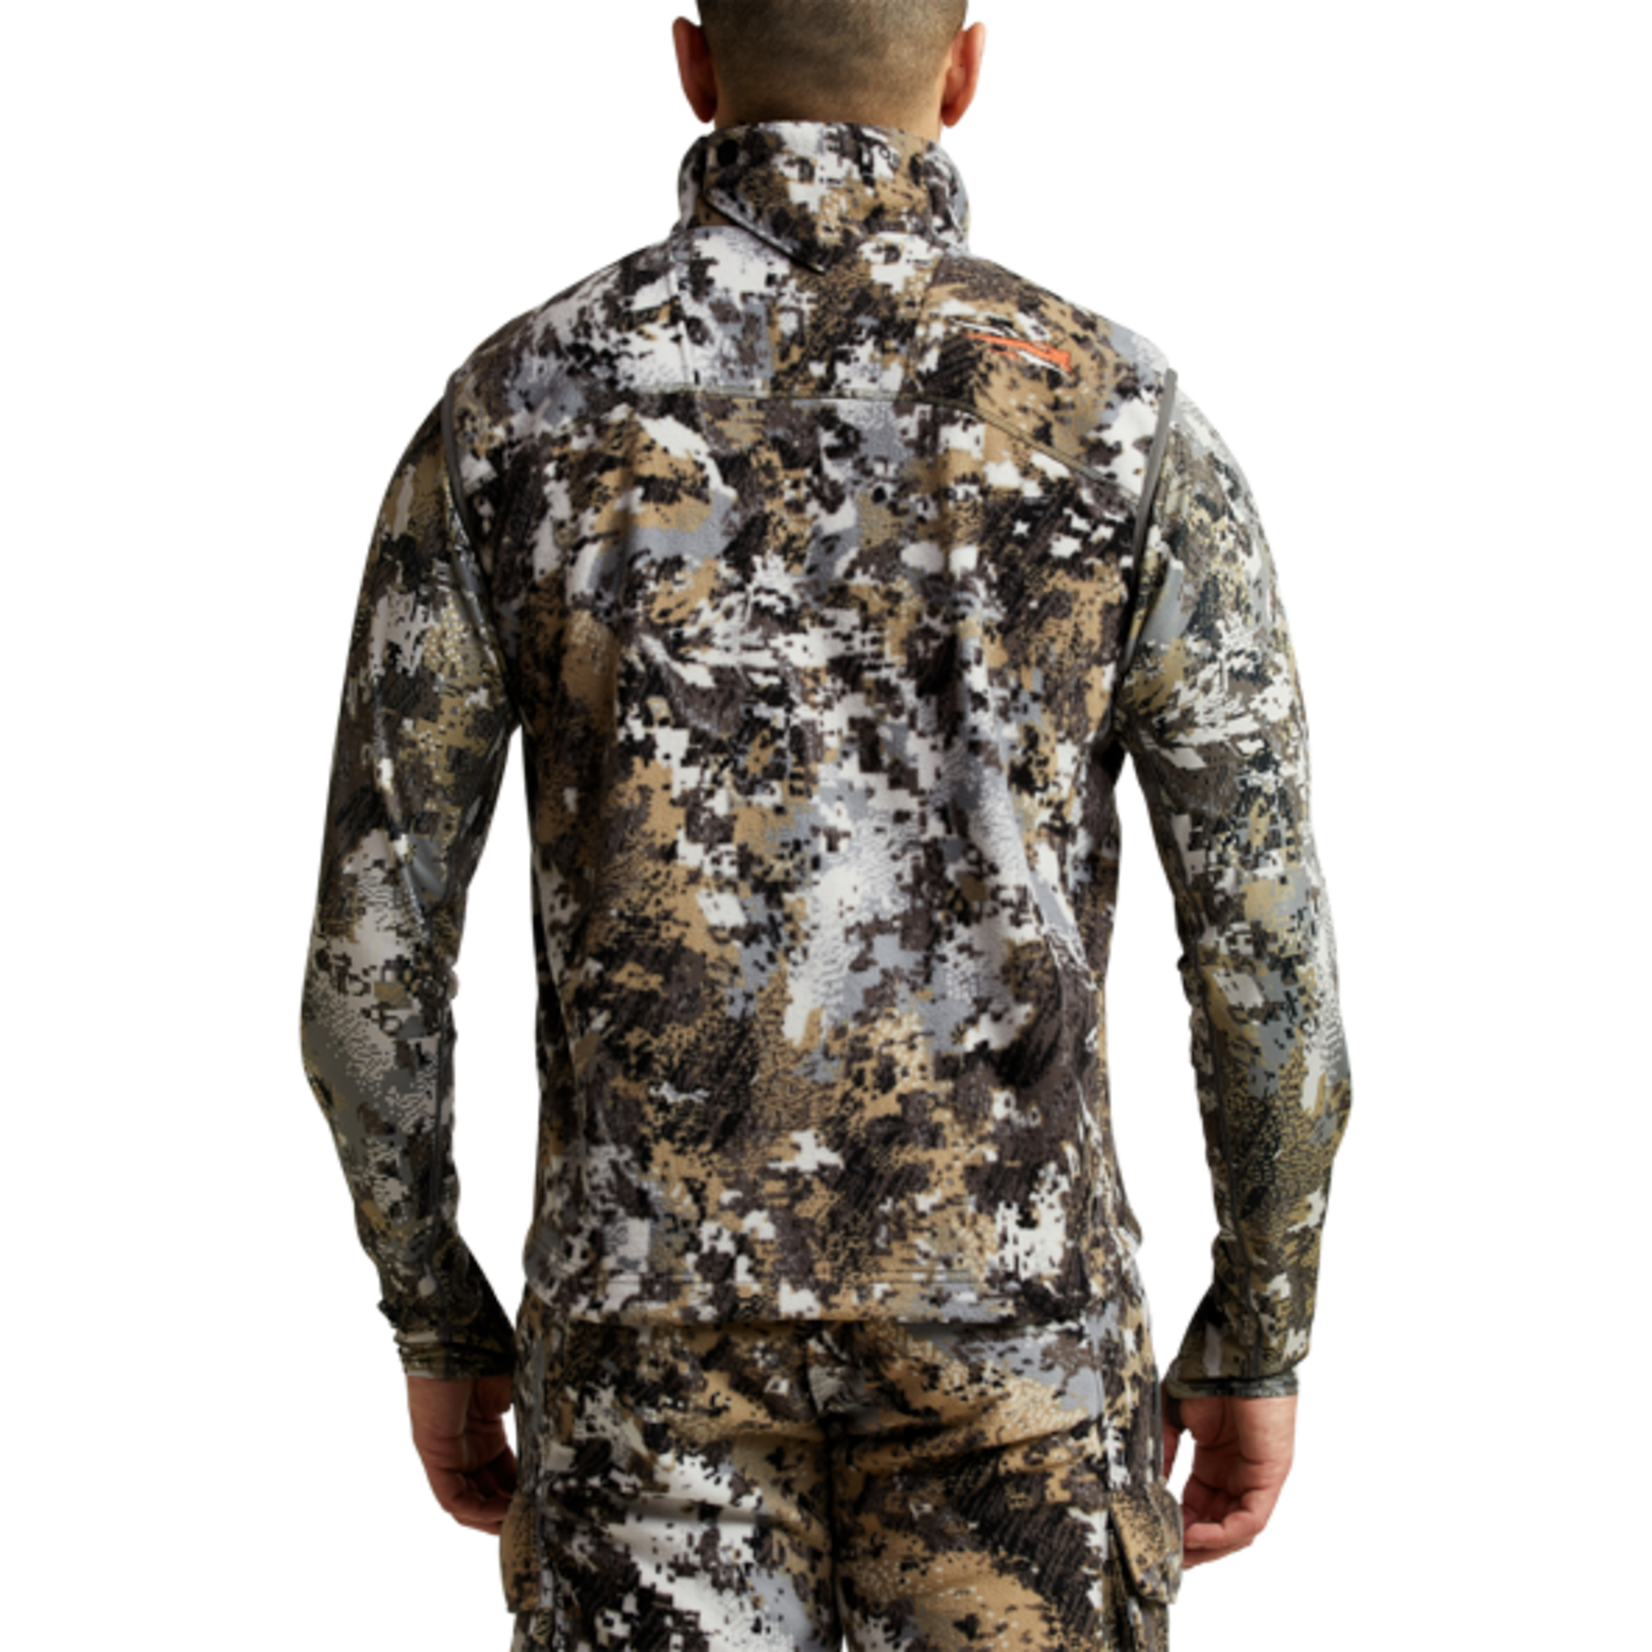 SITKA GEAR STRATUS VEST - ELEVATED